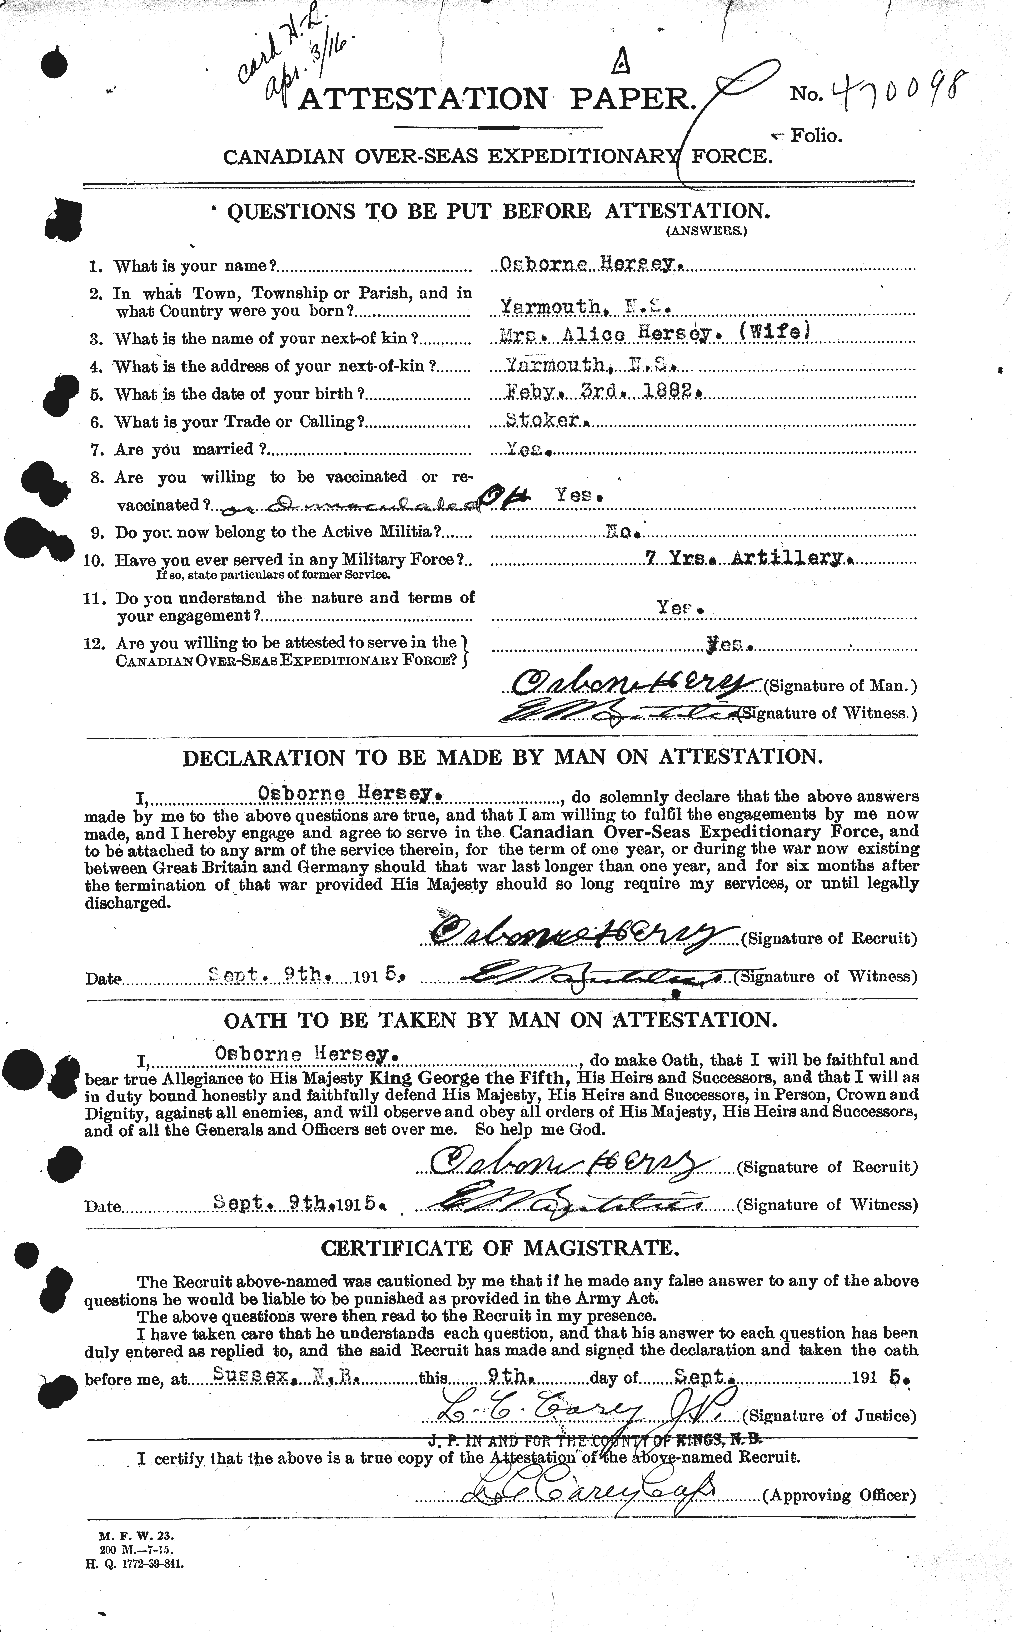 Personnel Records of the First World War - CEF 390421a